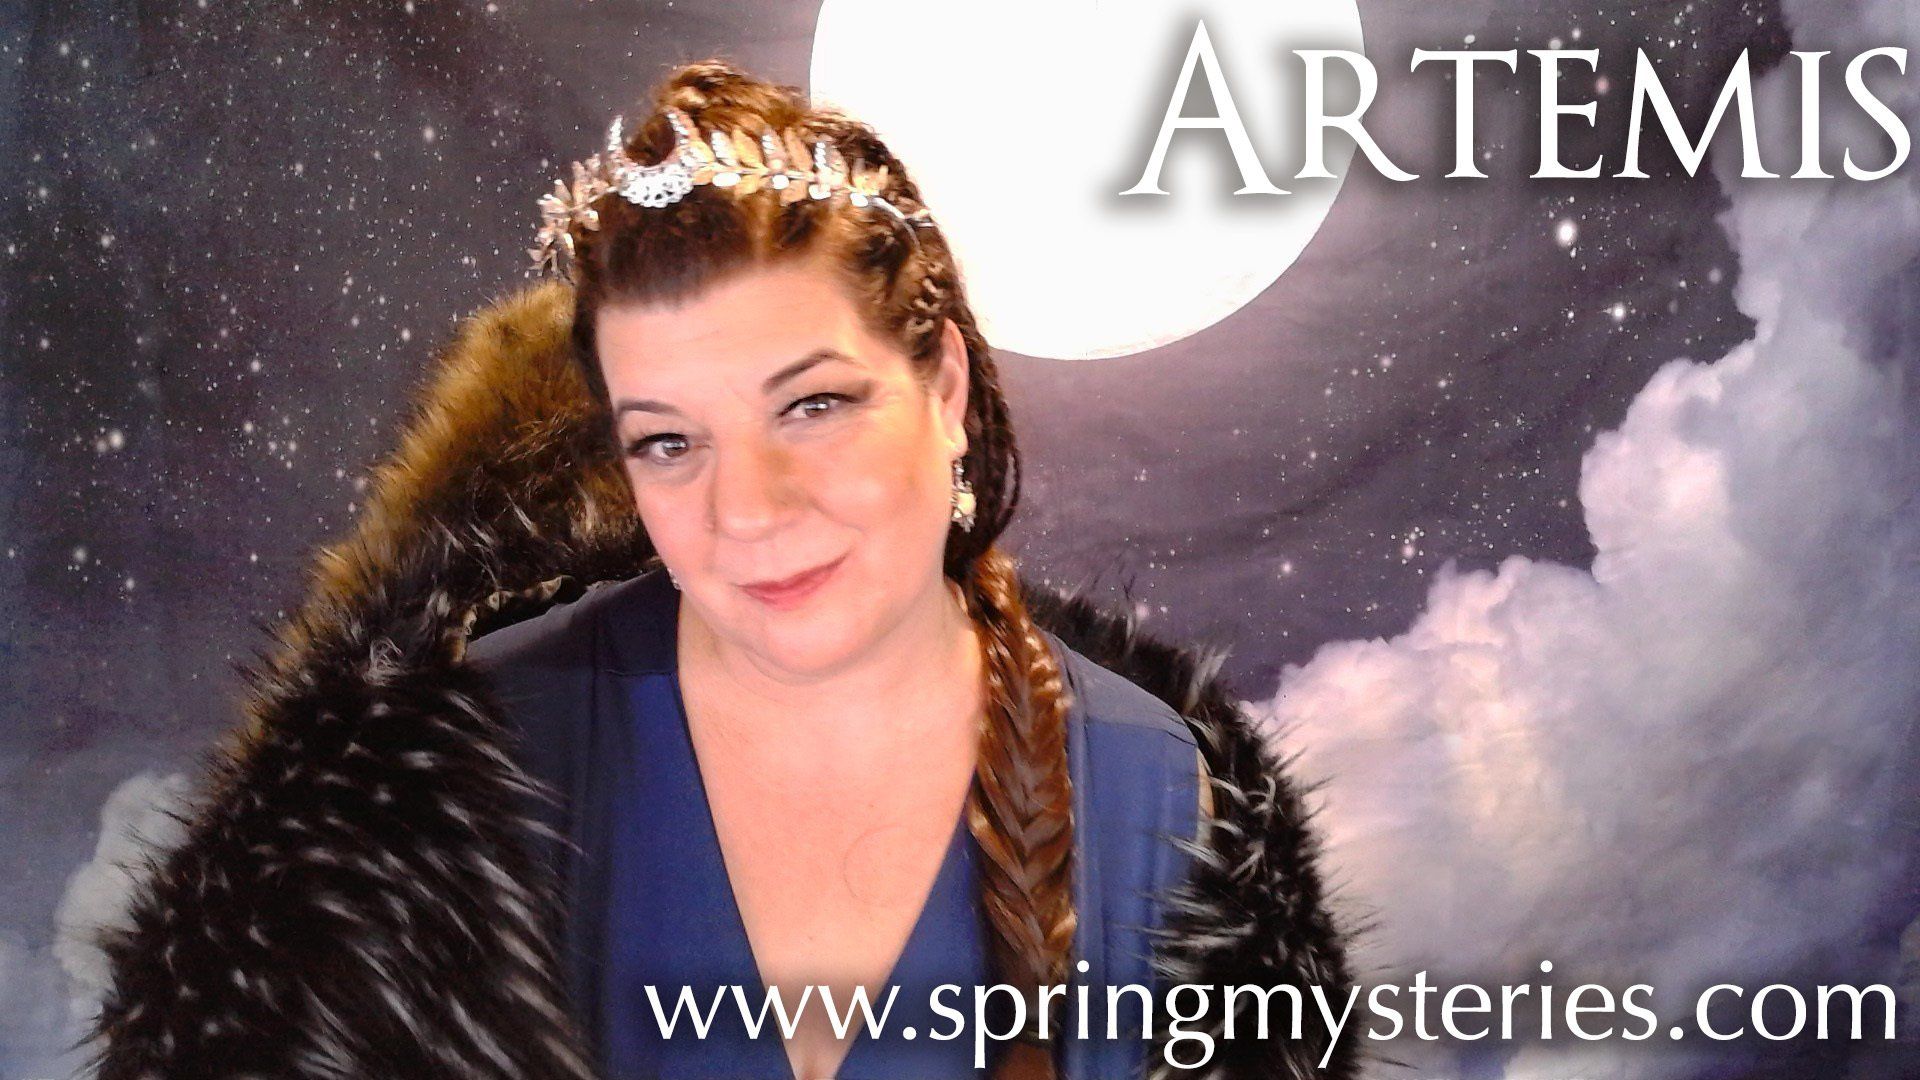 A woman is standing in front of a moon with the website www.springmysteries.com below her,  representing Artemis.